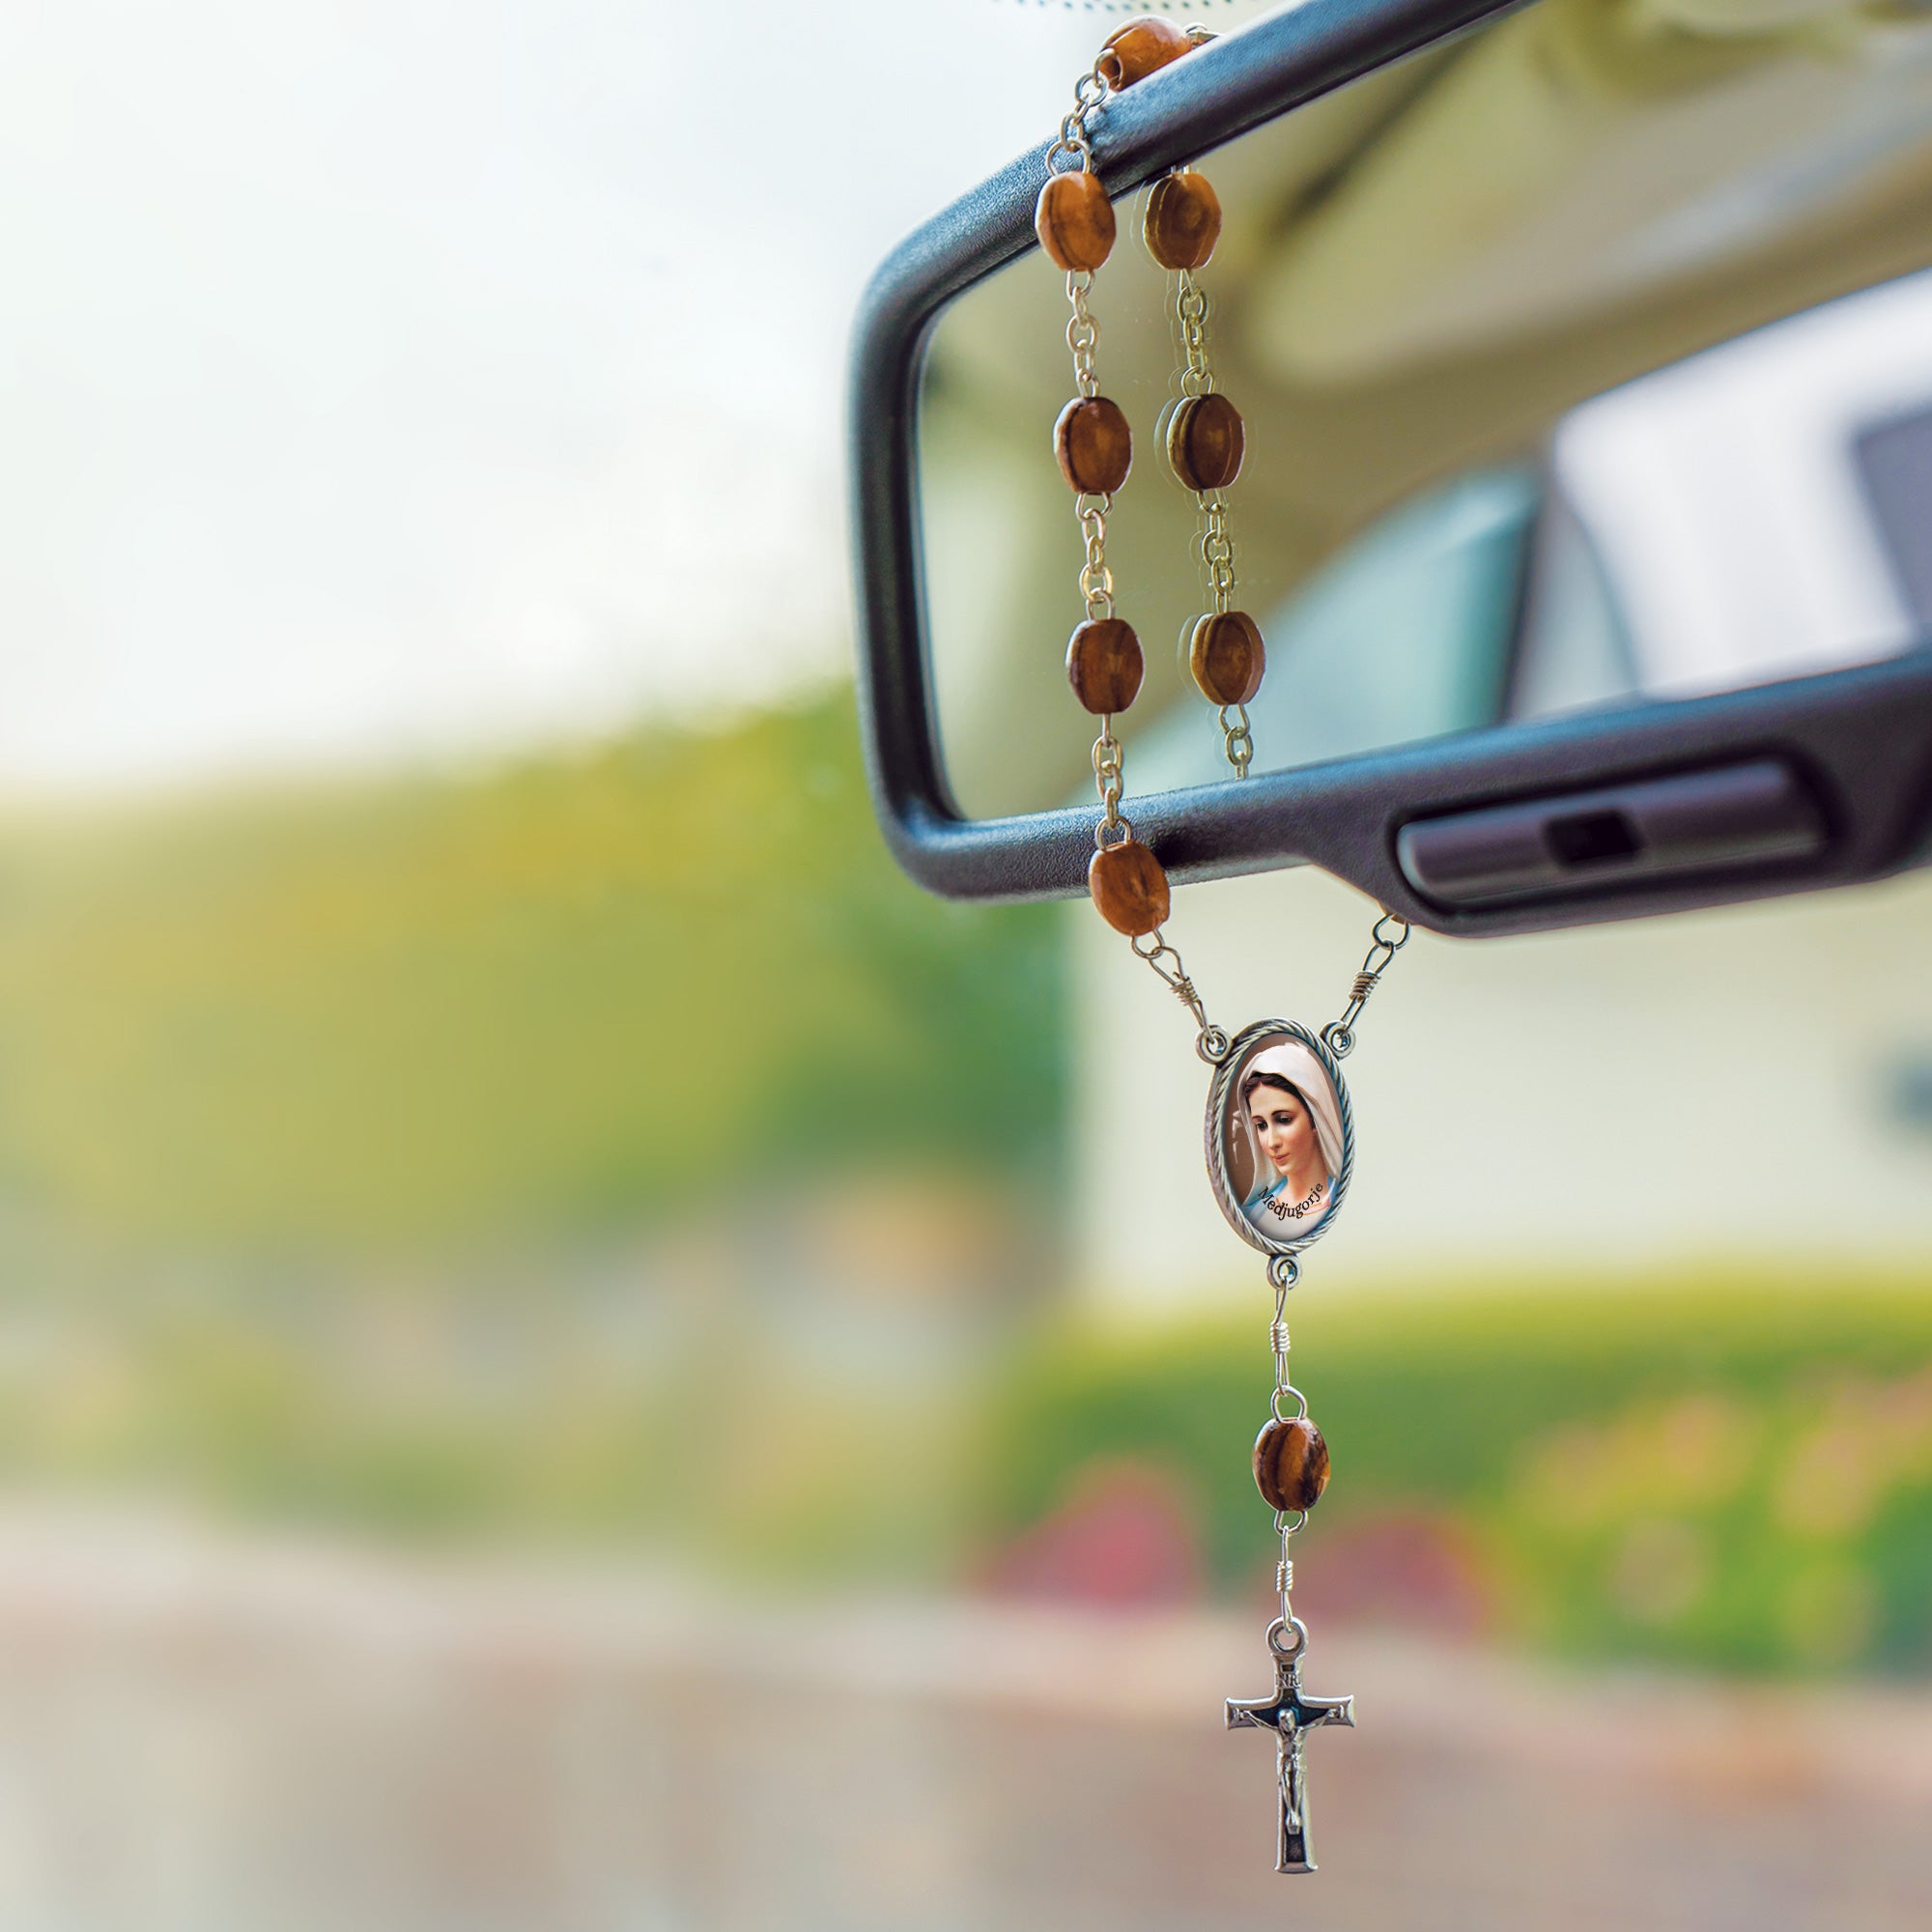 Virgin Mary Medjugorje, Holy Land Olive Wood Pocket Auto Rosary, Made in Bethlehem on rearview mirror